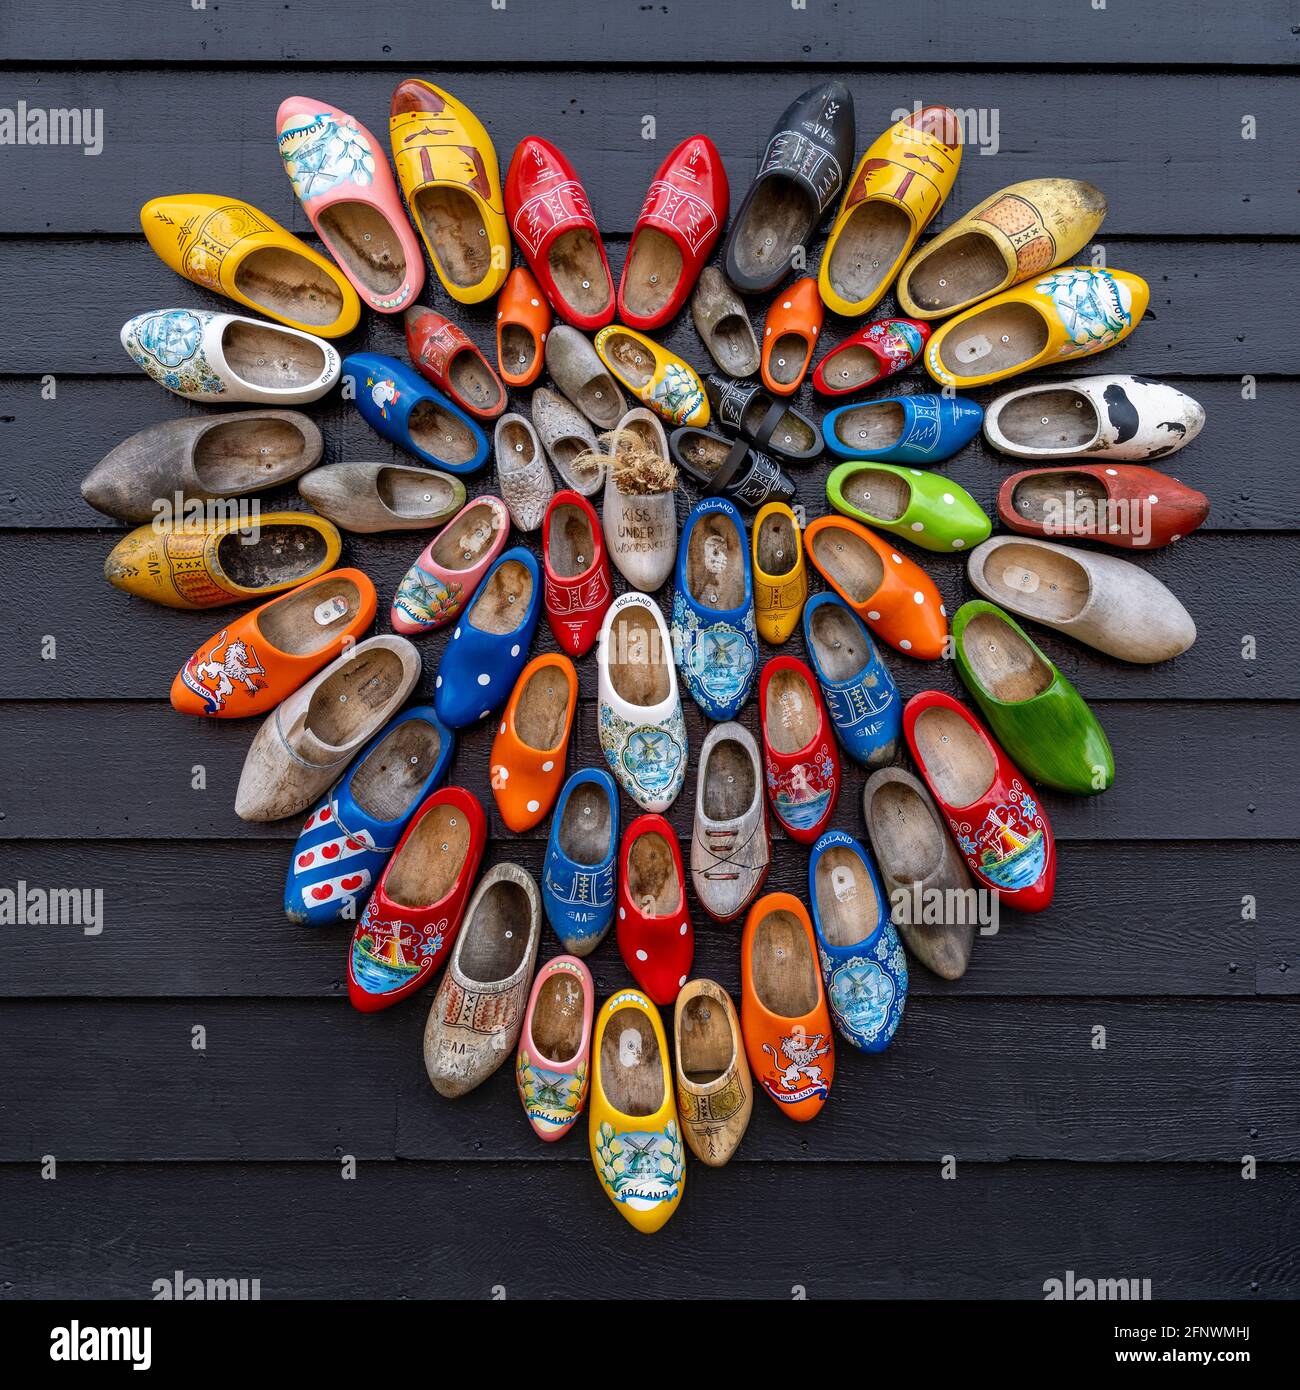 A close up view of many colorful traditional clogs hanging on the wall of a house in the Netherlands Stock Photo